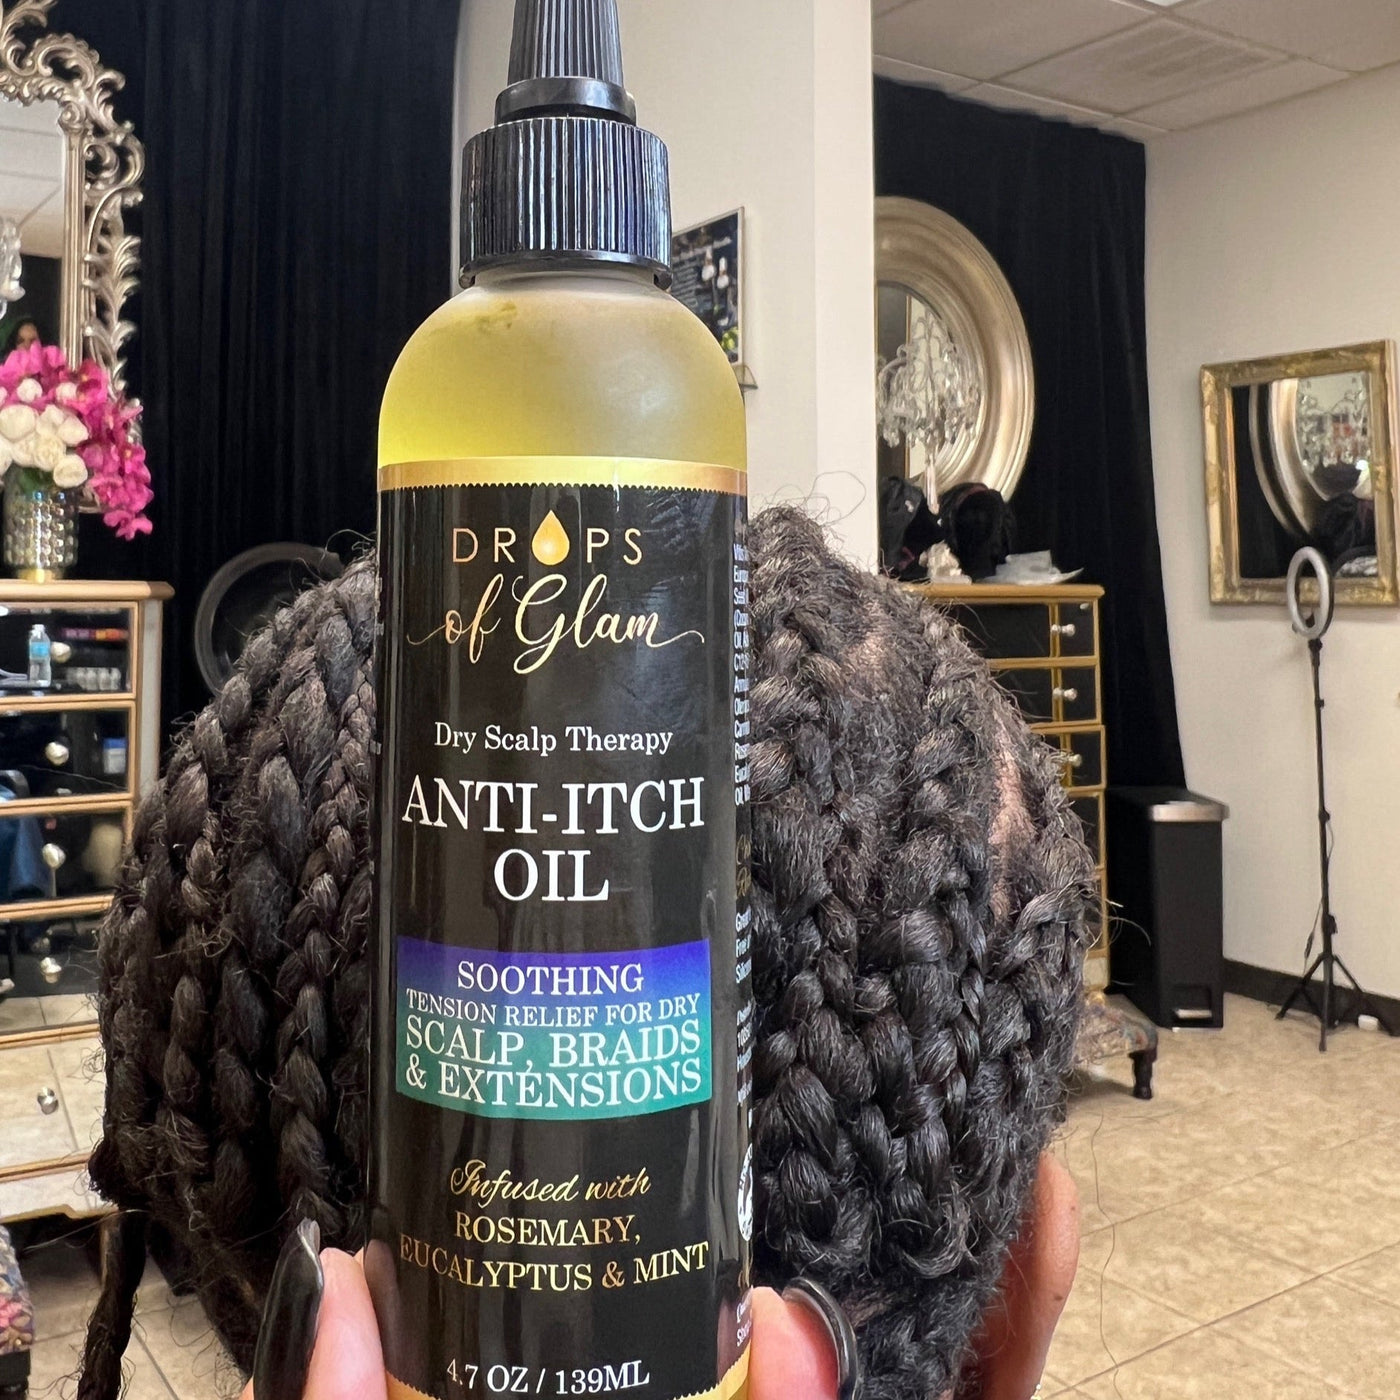 Anti-Itch Oil - Bundles and Drops of Glam